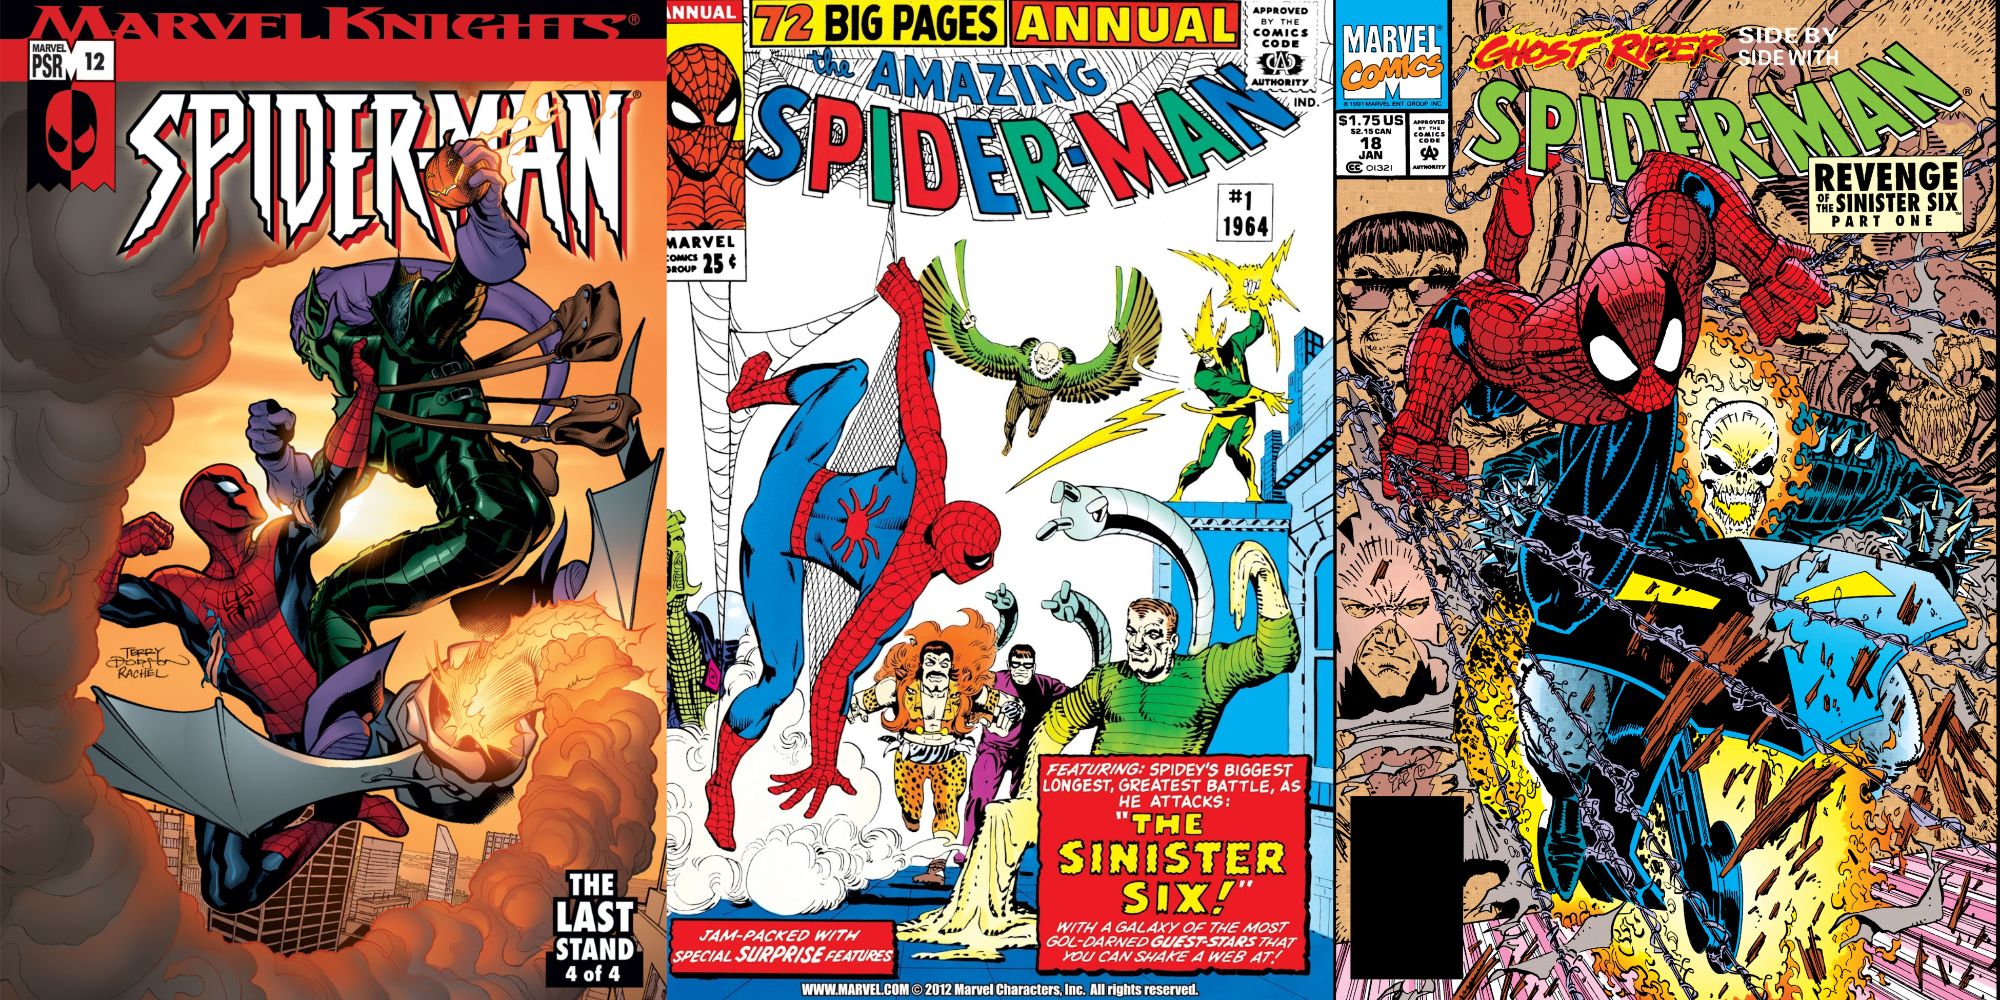 Split image of covers of Marvel Knights Spider-Man 12, Spider-Man Annual 1, and Spider-Man 18.